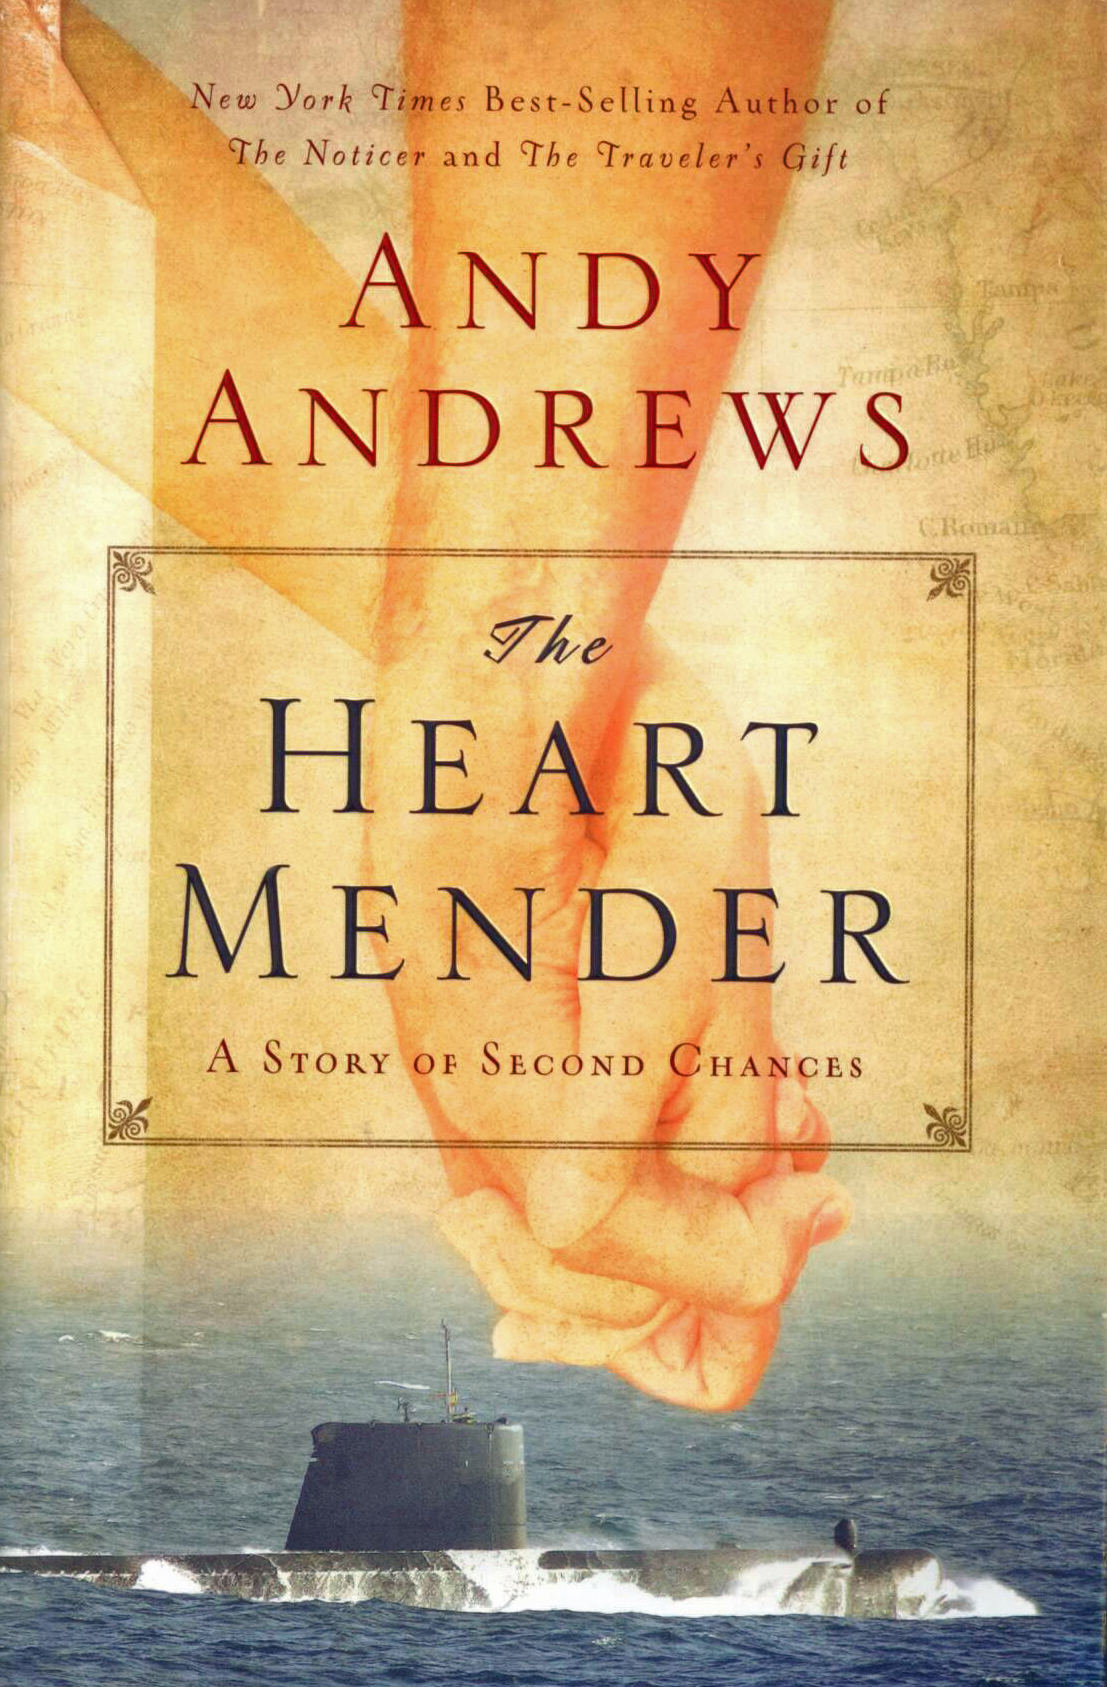 "The Heart Mender: A Story of Second Chances" by Andy Andrews